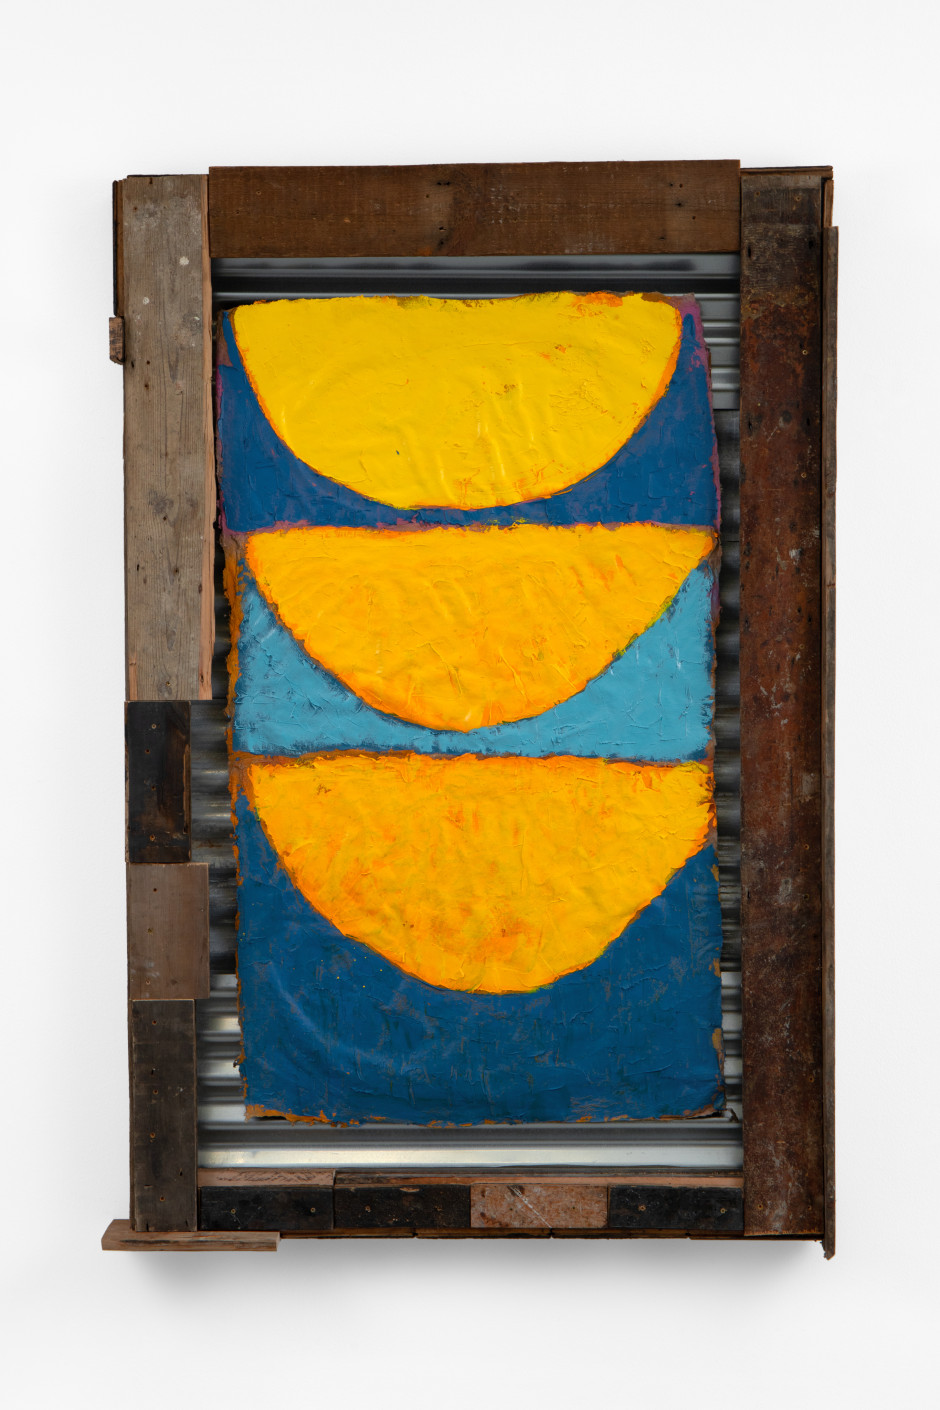 Alvaro Barrington  Simple Life, Sunset Three Days, 2023, 2023  oil and acrylic on paper in corrugated steel and reclaimed wood frame  183 x 122 x 15 cm / 72 x 48 x 5 ⅞ in  © Alvaro Barrington, courtesy Sadie Coles HQ, London  Photo: Katie Morrison